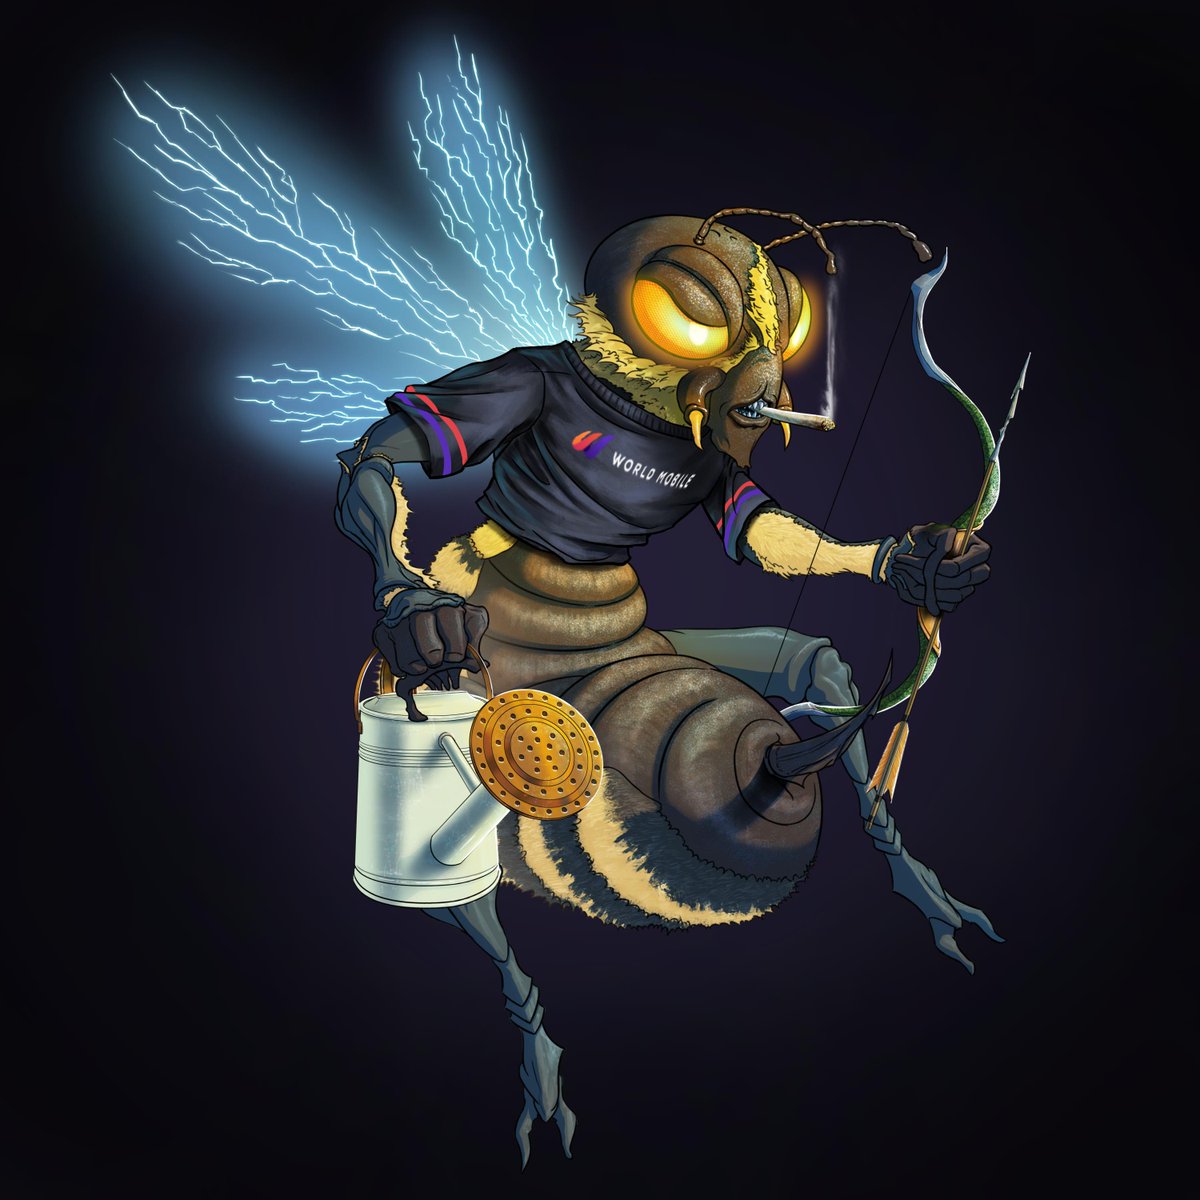 Check the fire art @BeezHiveNFT 2.0 #BuzzBuzz
Bonus @wmtoken bounty trait too! Happy Daze!
These wont be leaving my wallet. Soon I will be staking for my share of the $NECTAR 🍯#SaveTheBees
@InmatesOTWT  @Thelibrary888 @riskgamingco @BankercoinAda @HopsOnCardano @DiamondHoovesio